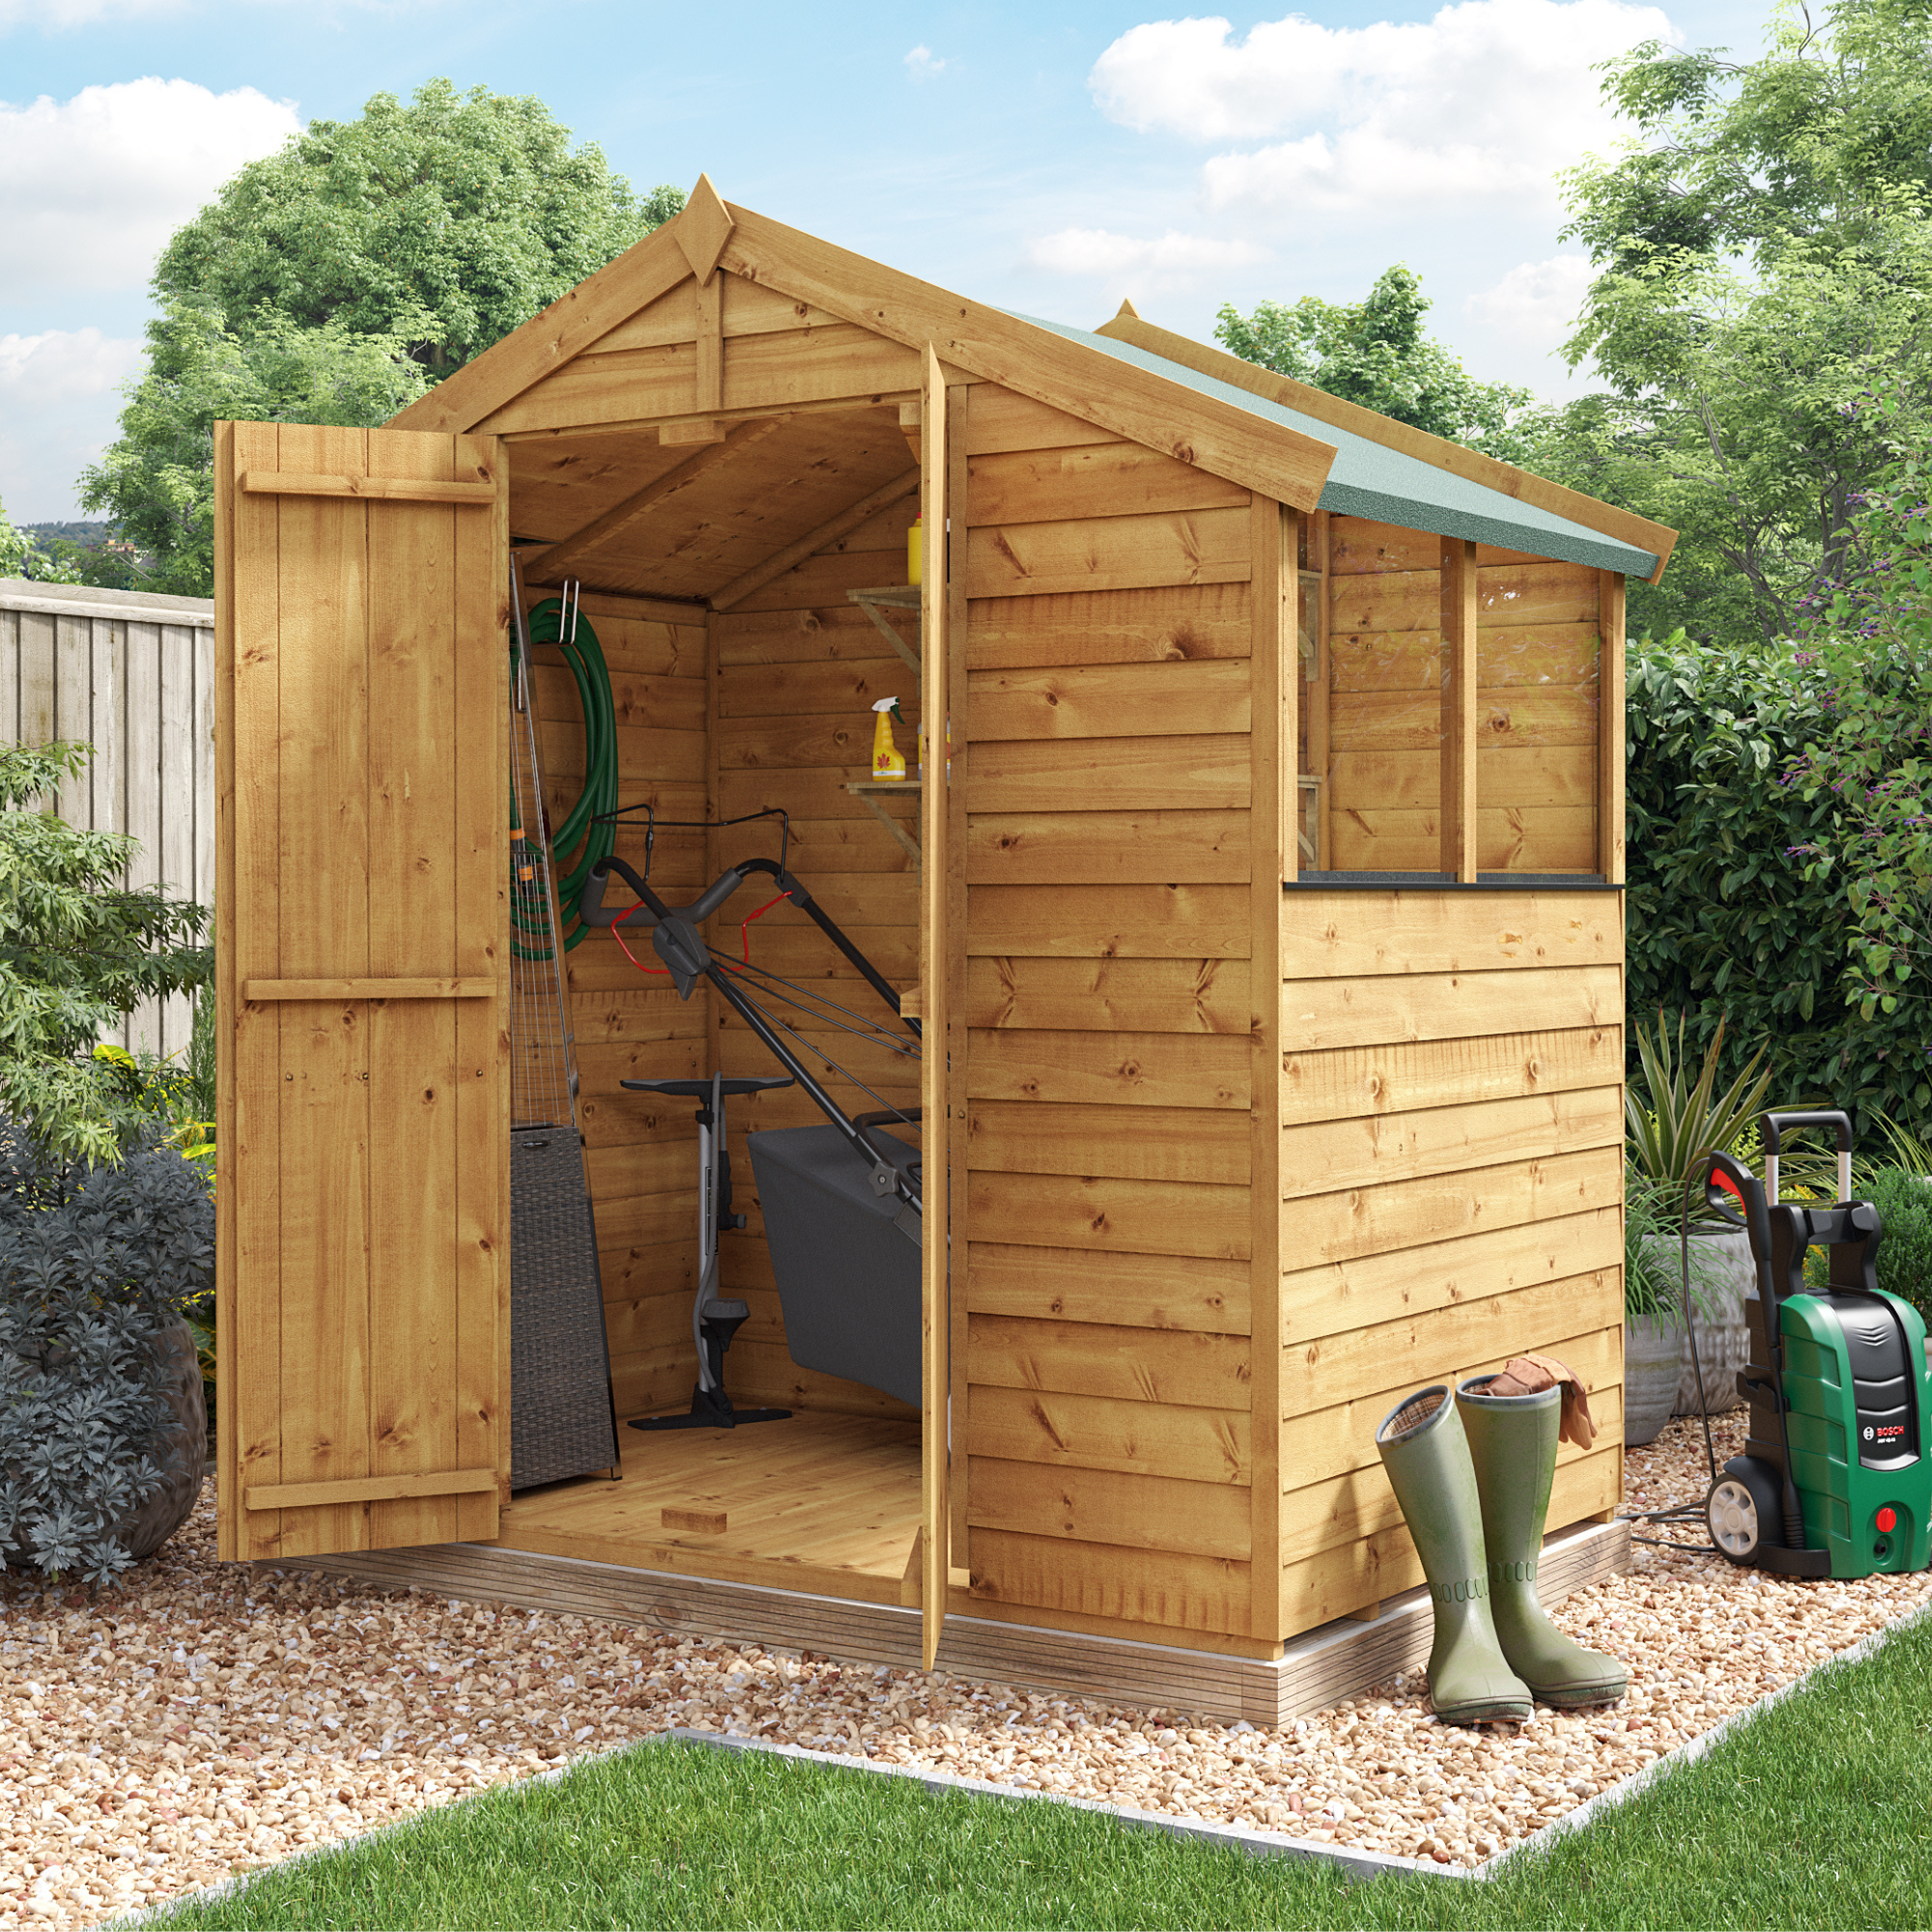 4 x 6 Shed - BillyOh Keeper Overlap Apex Wooden Shed - Windowed 4x6 Garden Shed